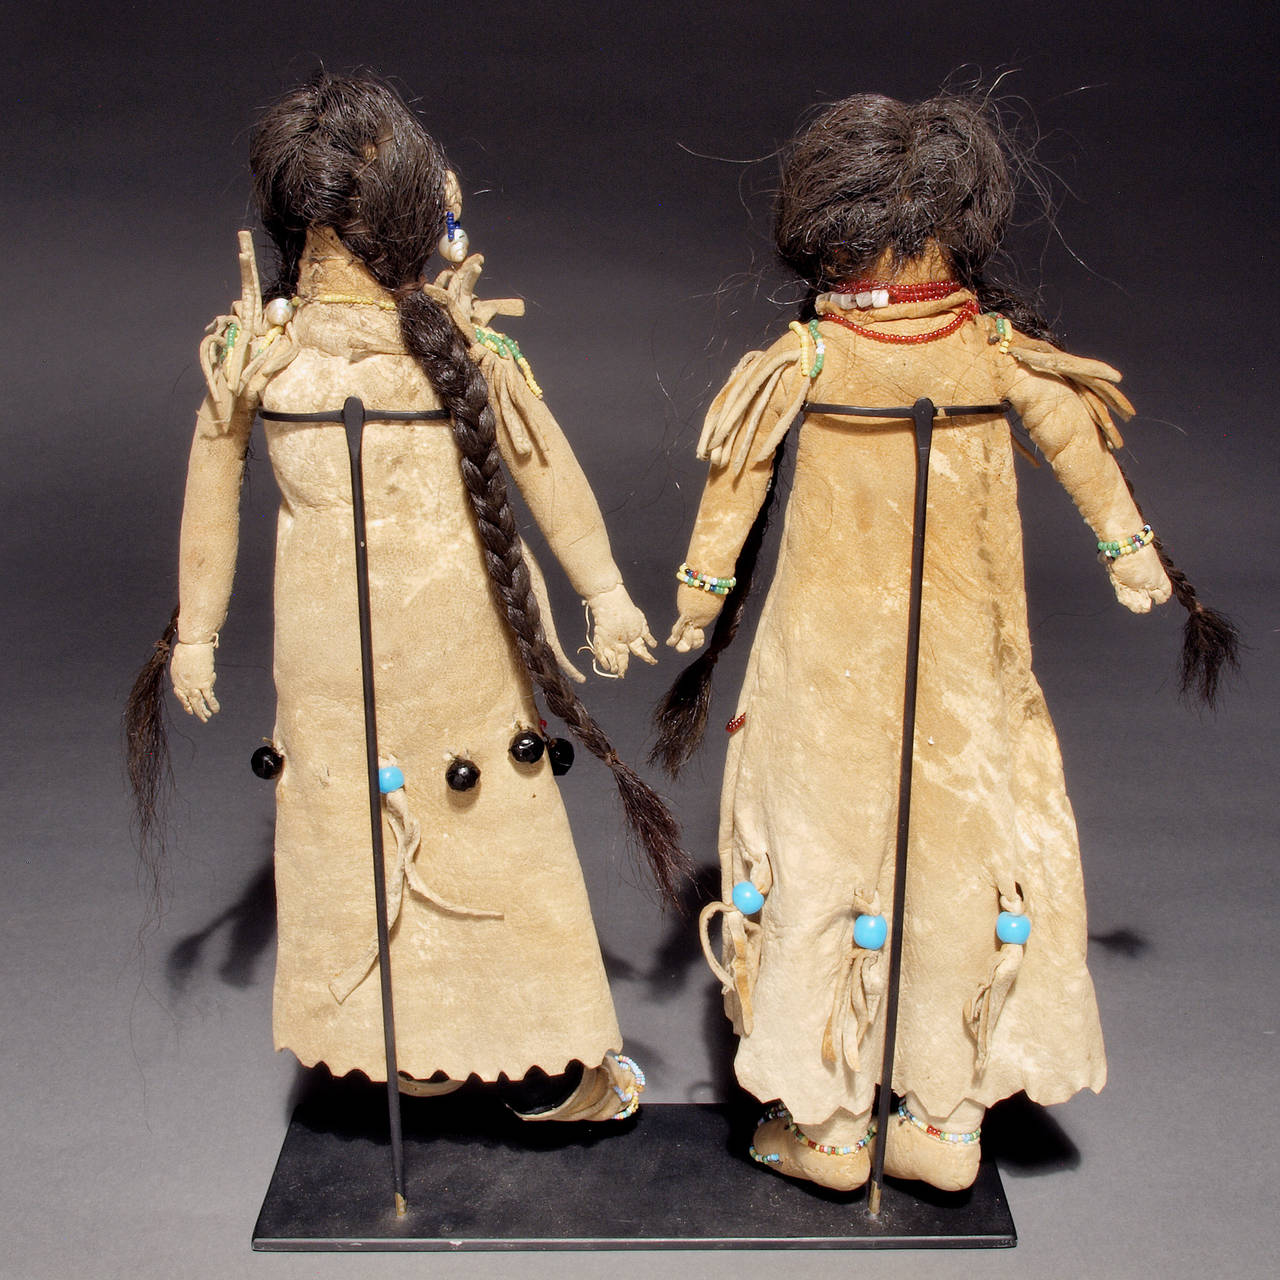 Created in the late 19th century, these authentic Northwest Coast Native American Indian dolls are depicted wearing traditional Athapaskan dress. Constructed of native tanned hide and sinew-sewn with trade beads and horse hair.

Custom display